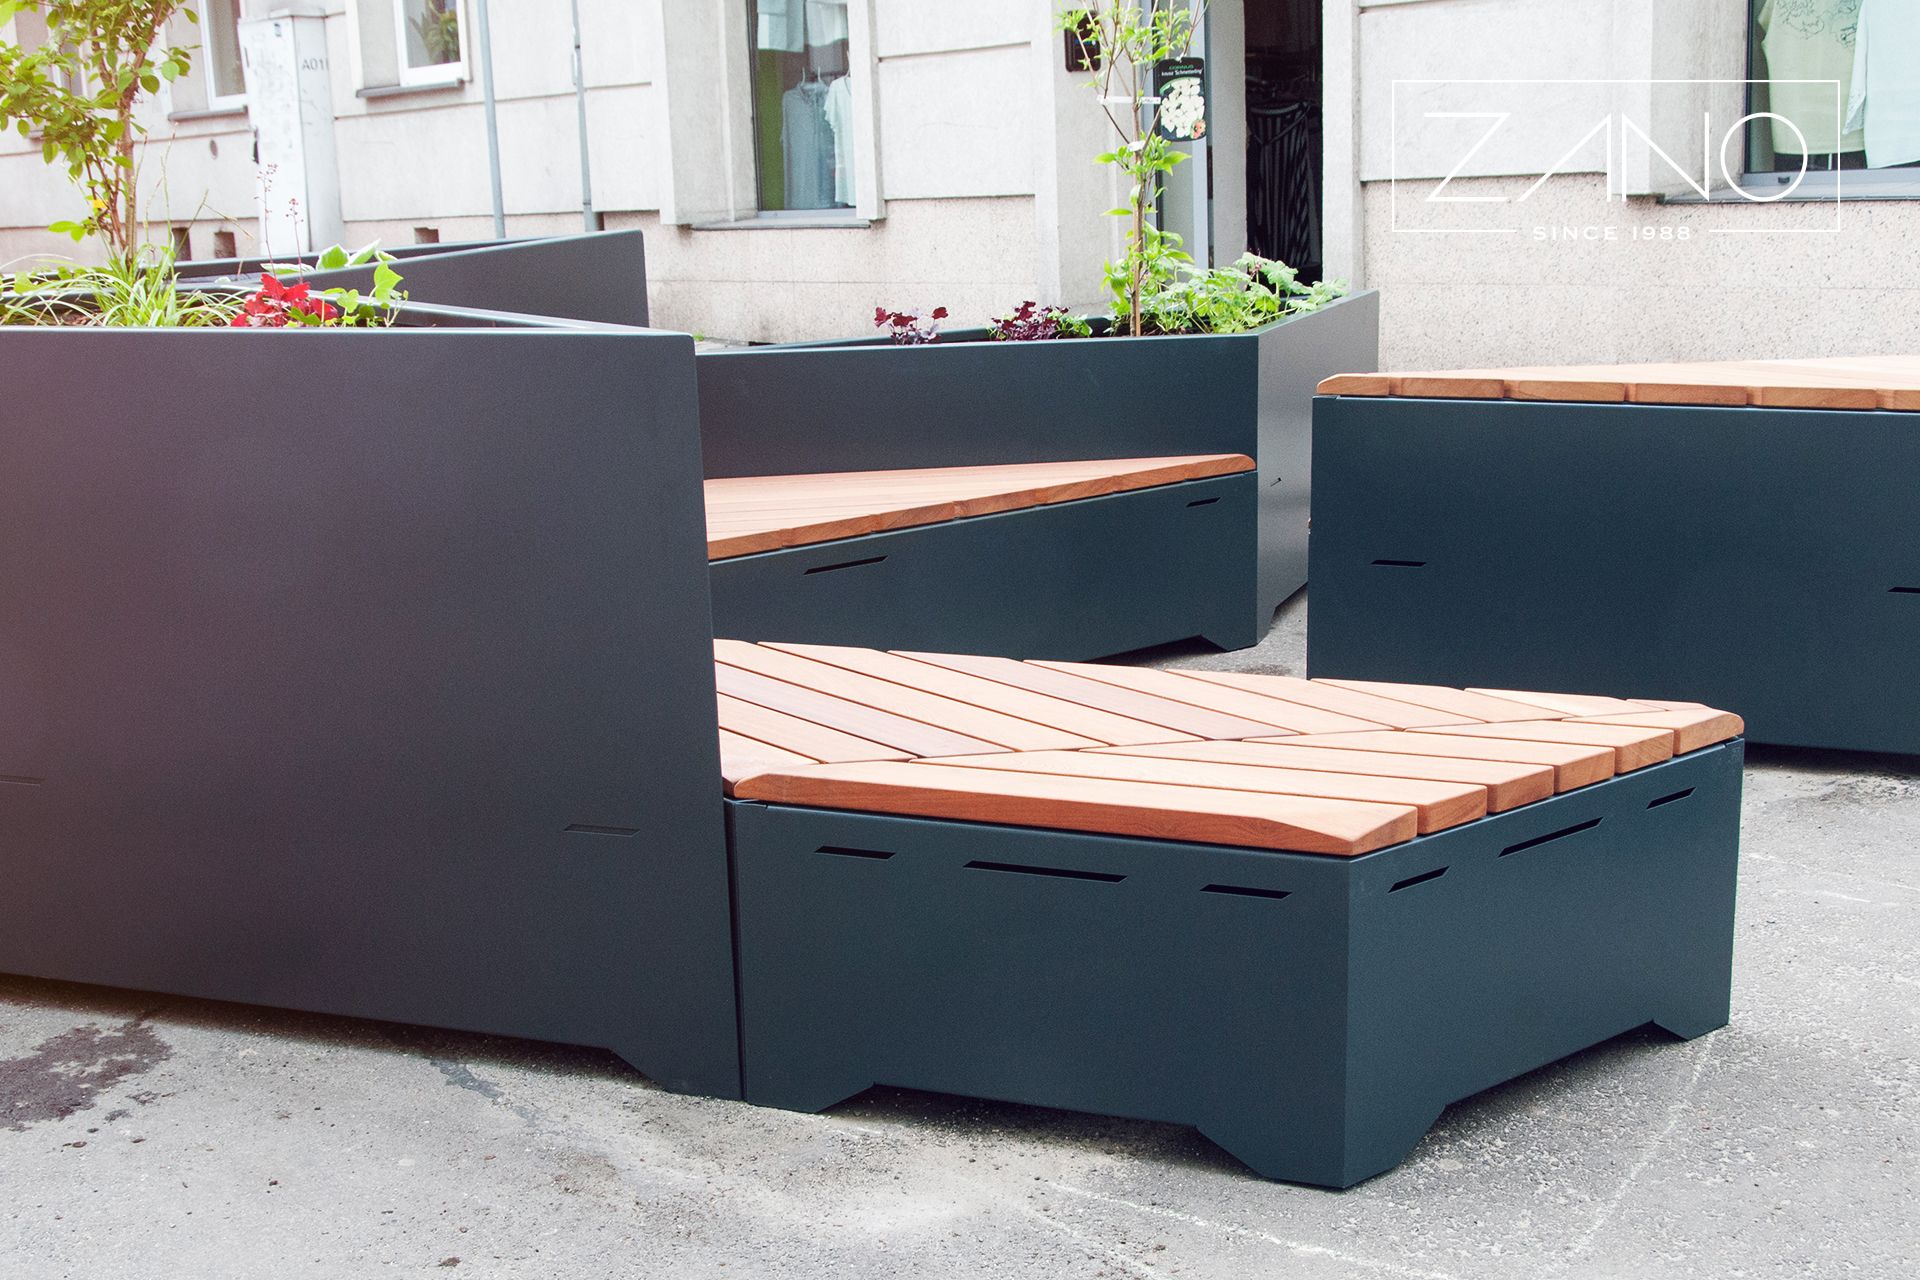 Street planters and benches